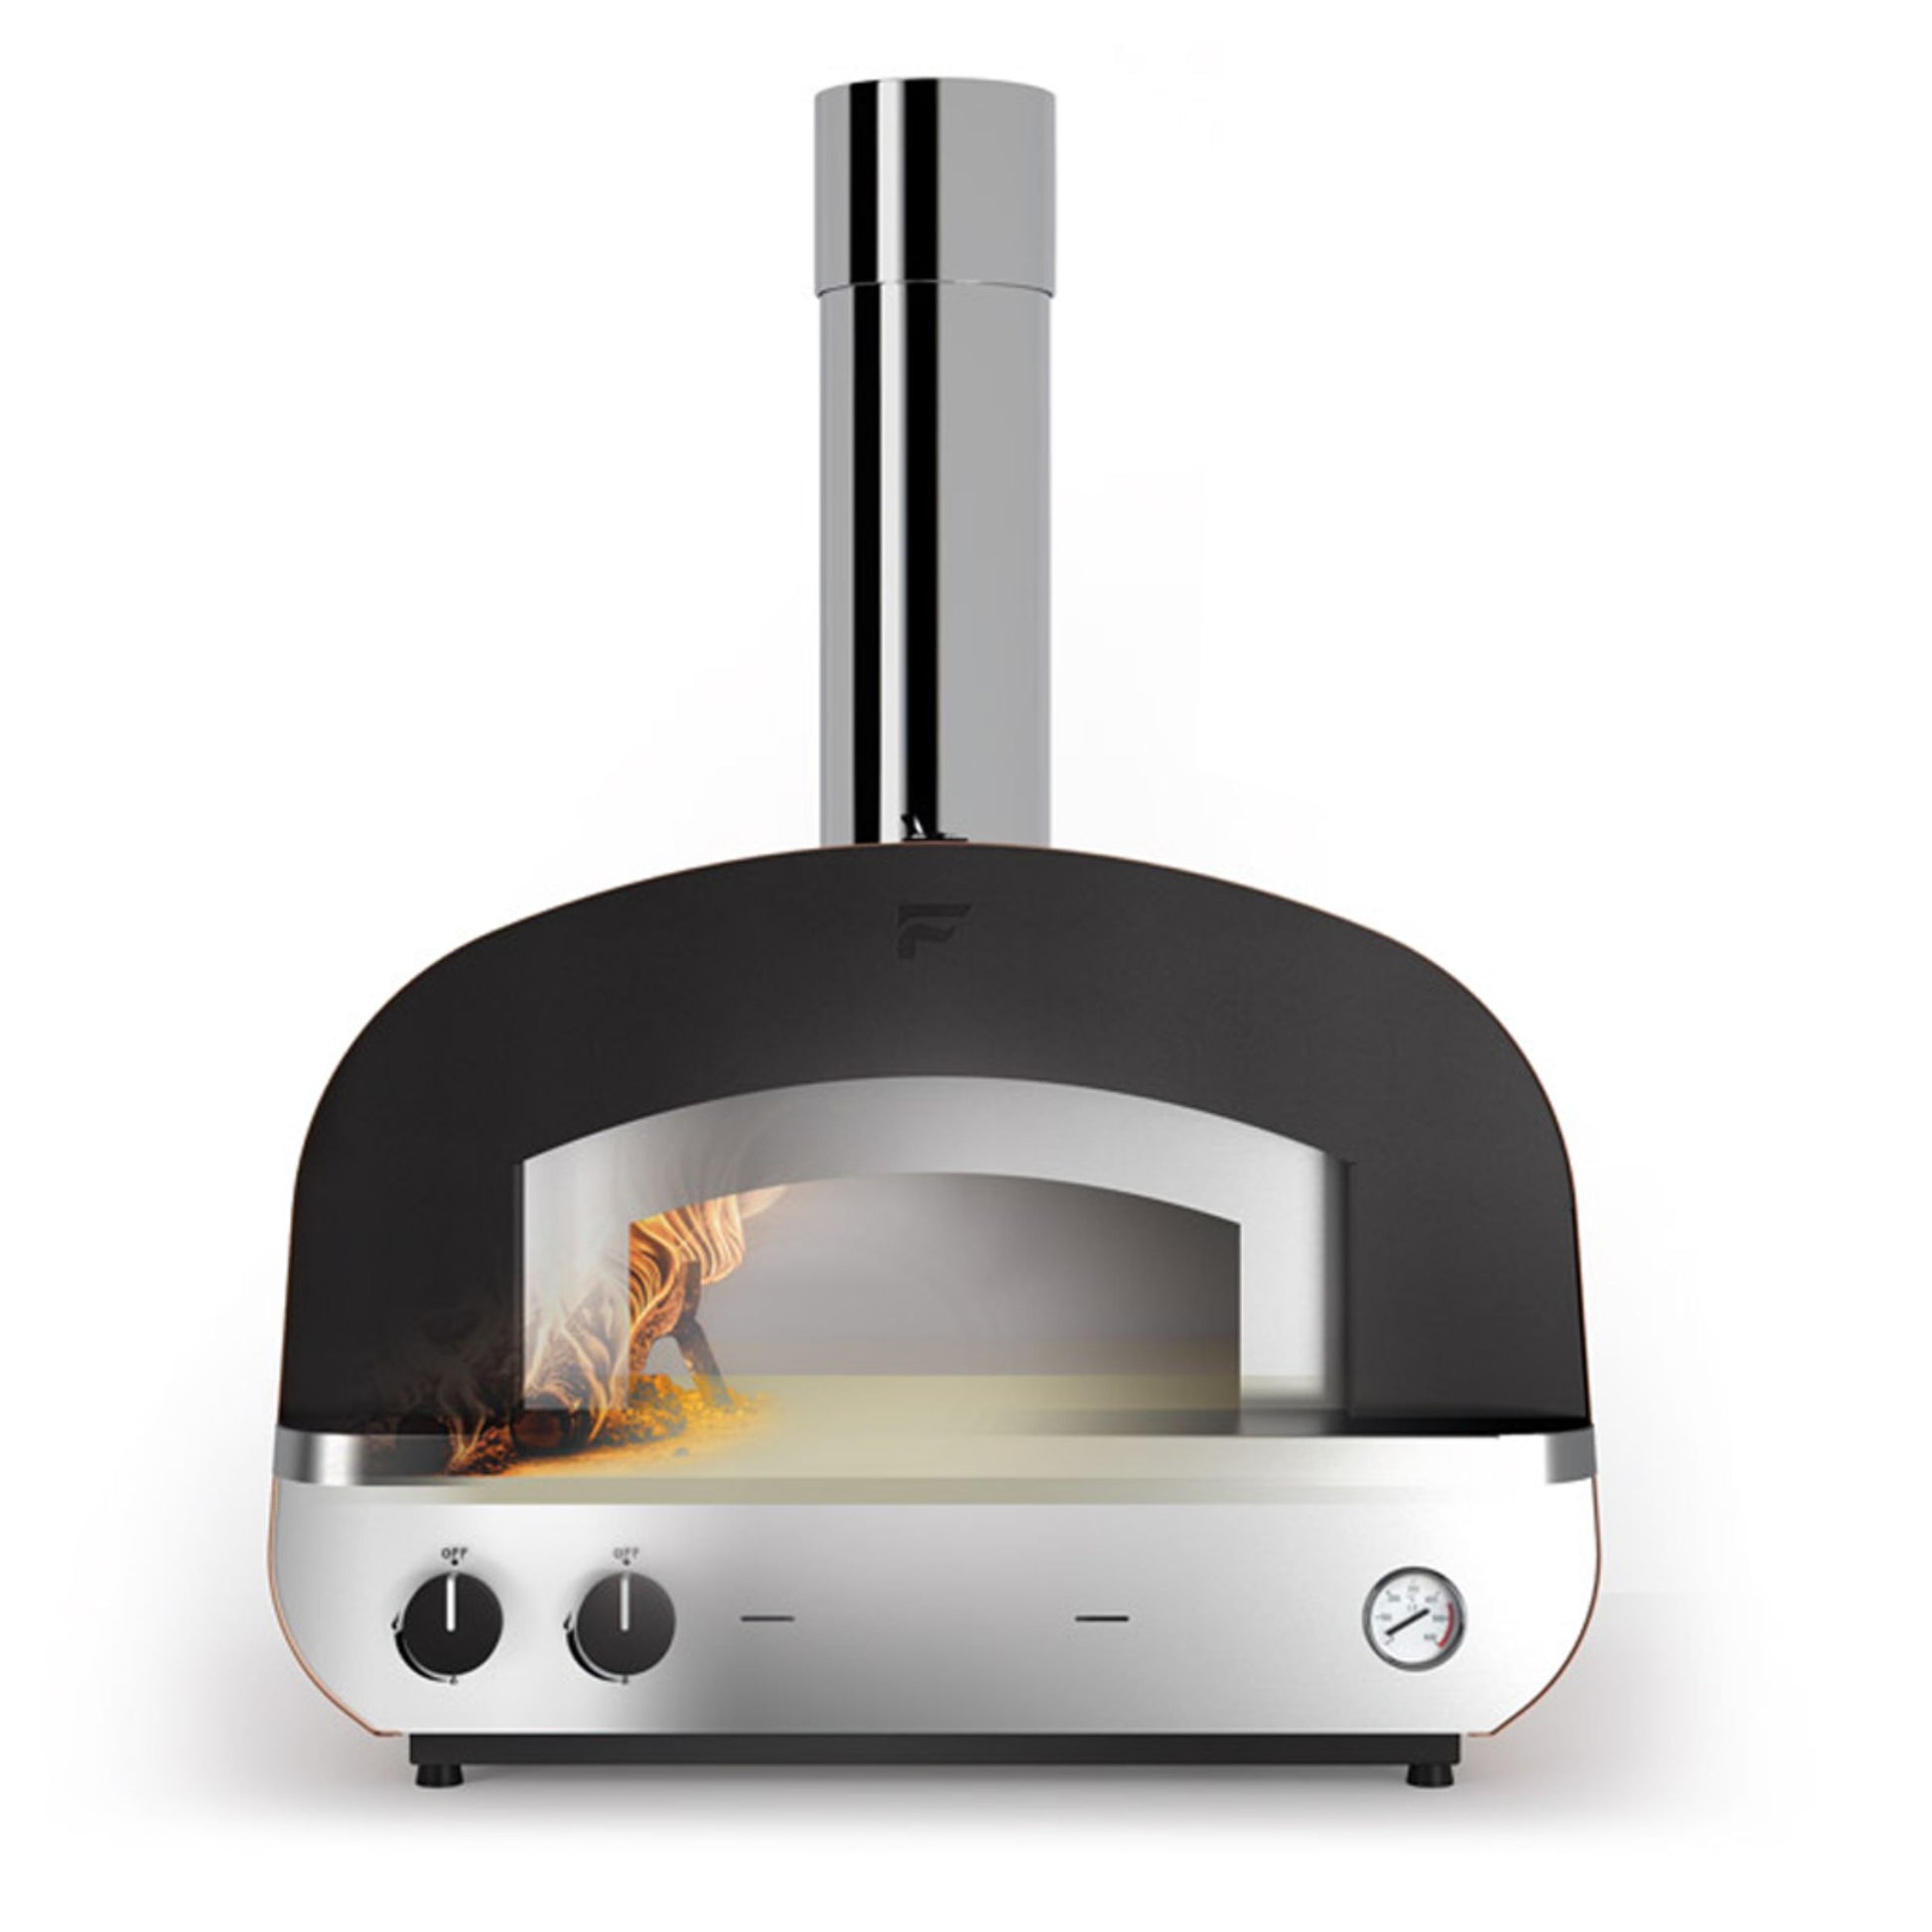  Fontana Piero Build In Gas & Wood Fired Pizza Oven